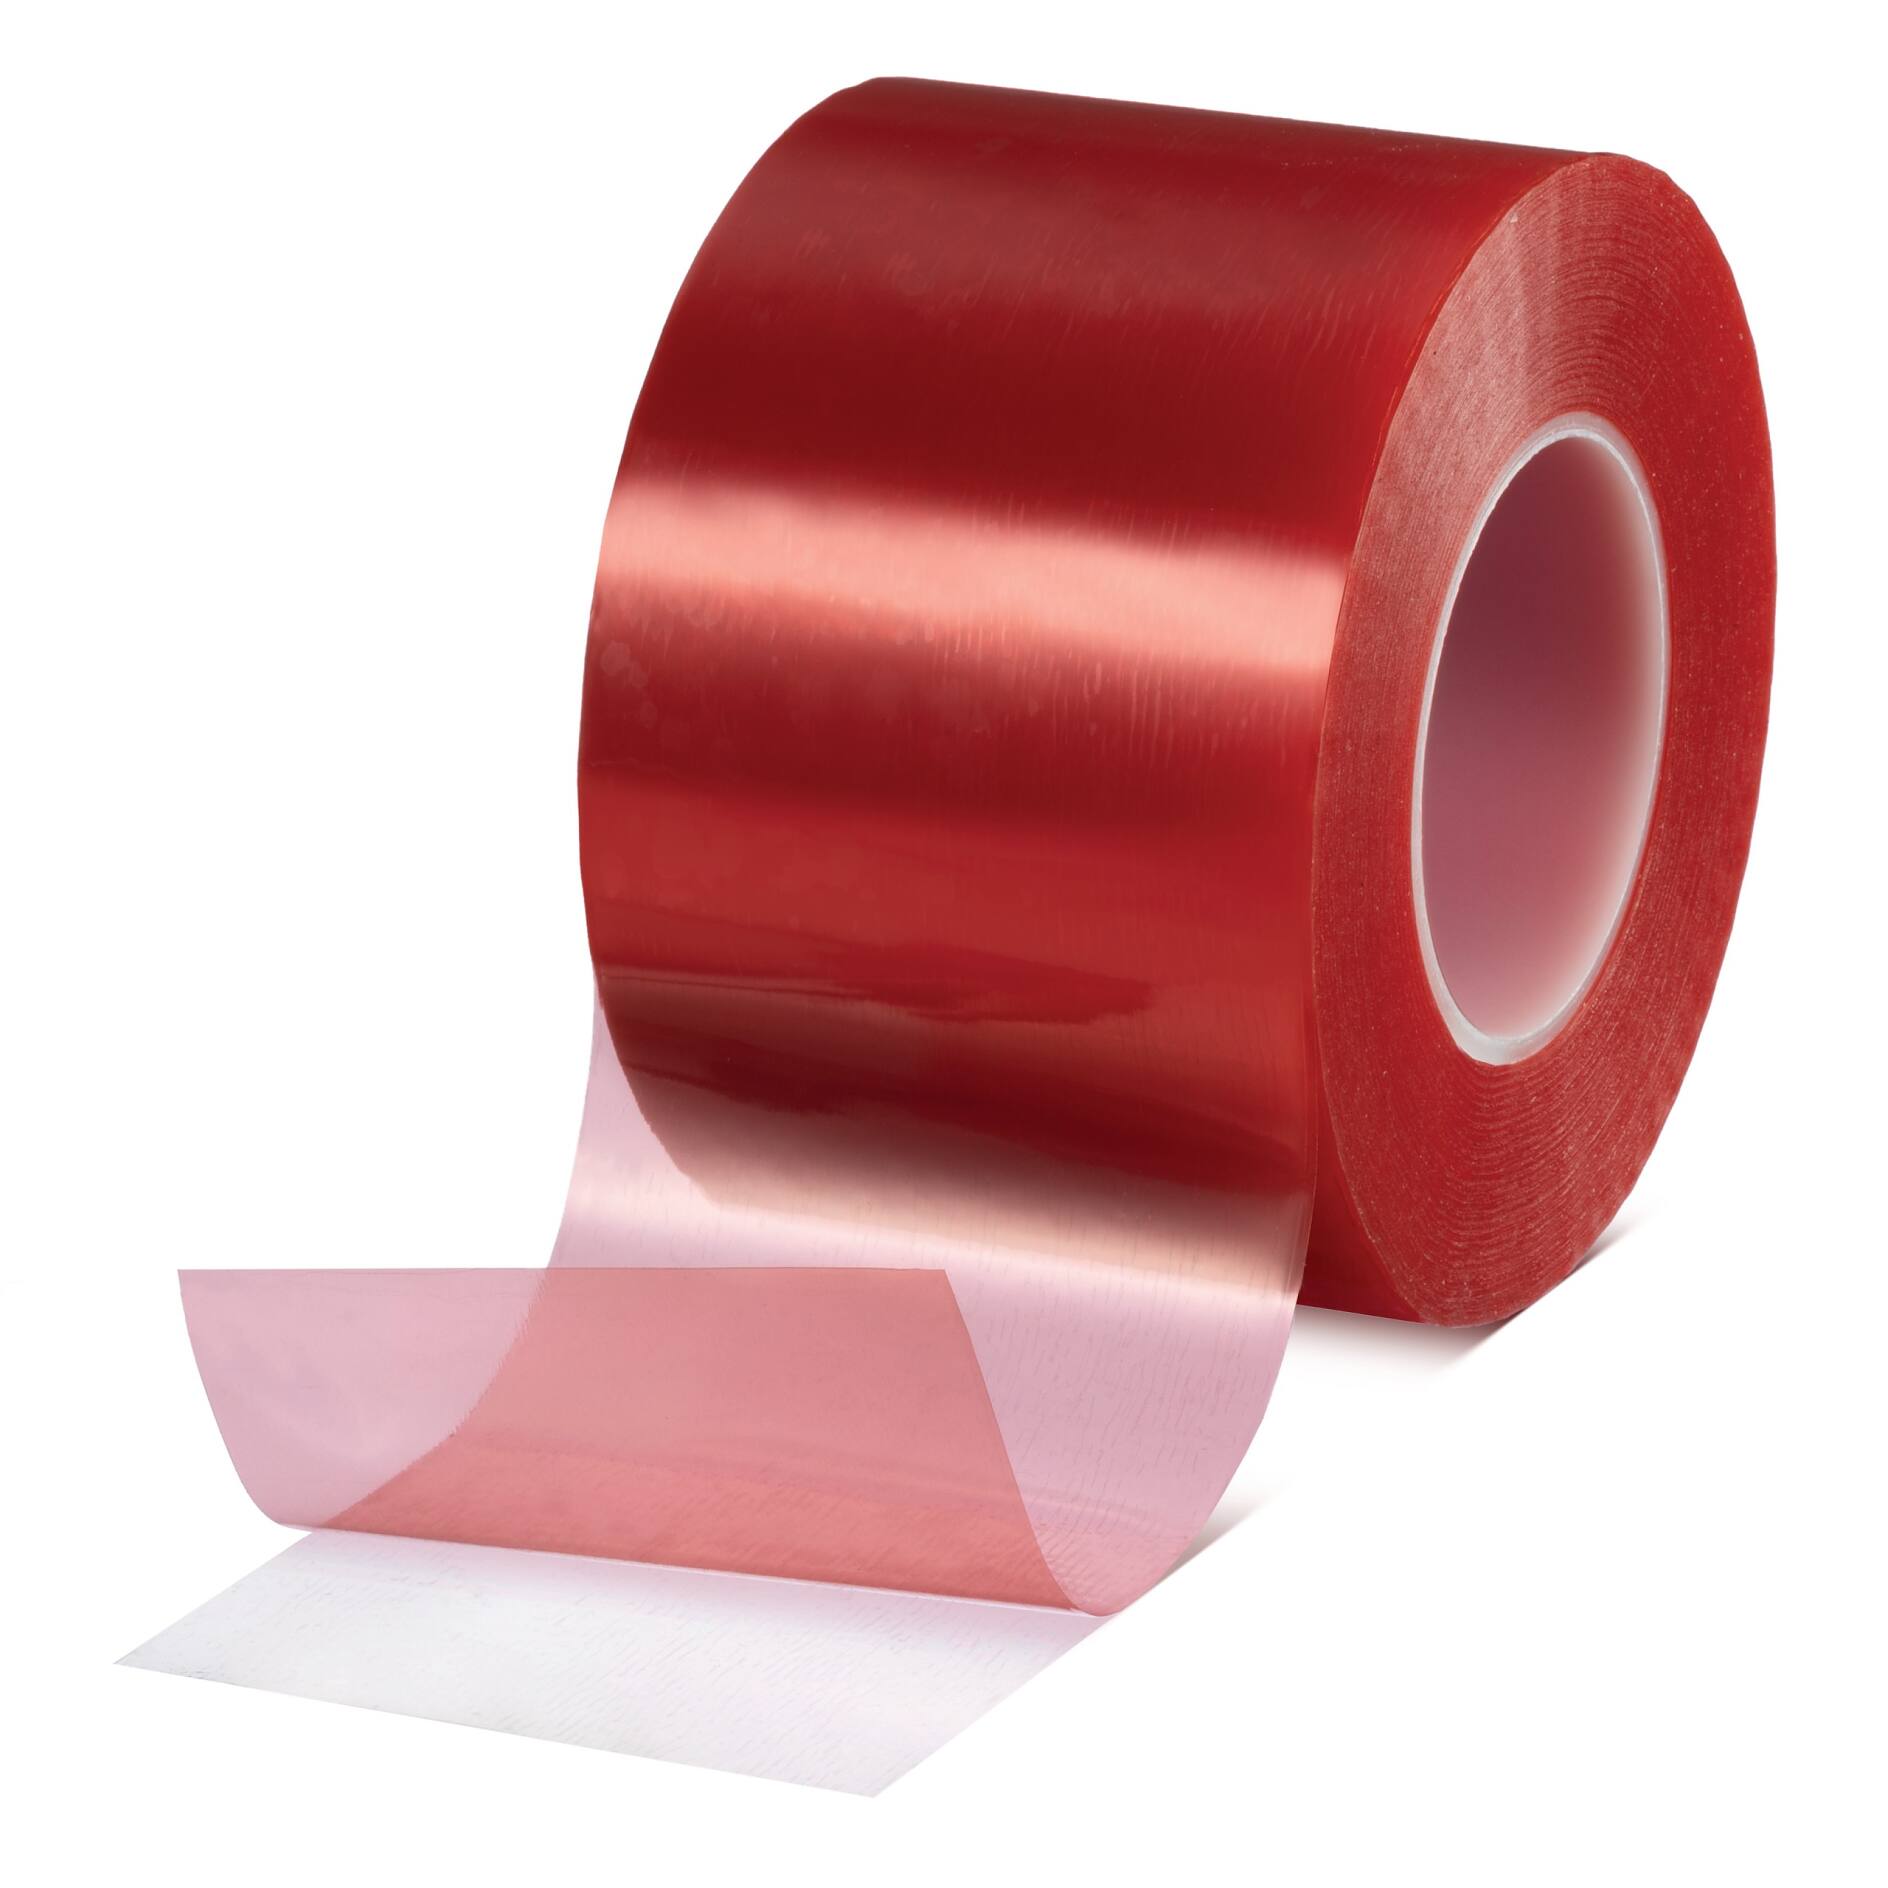 Double-sided PVC adhesive tape